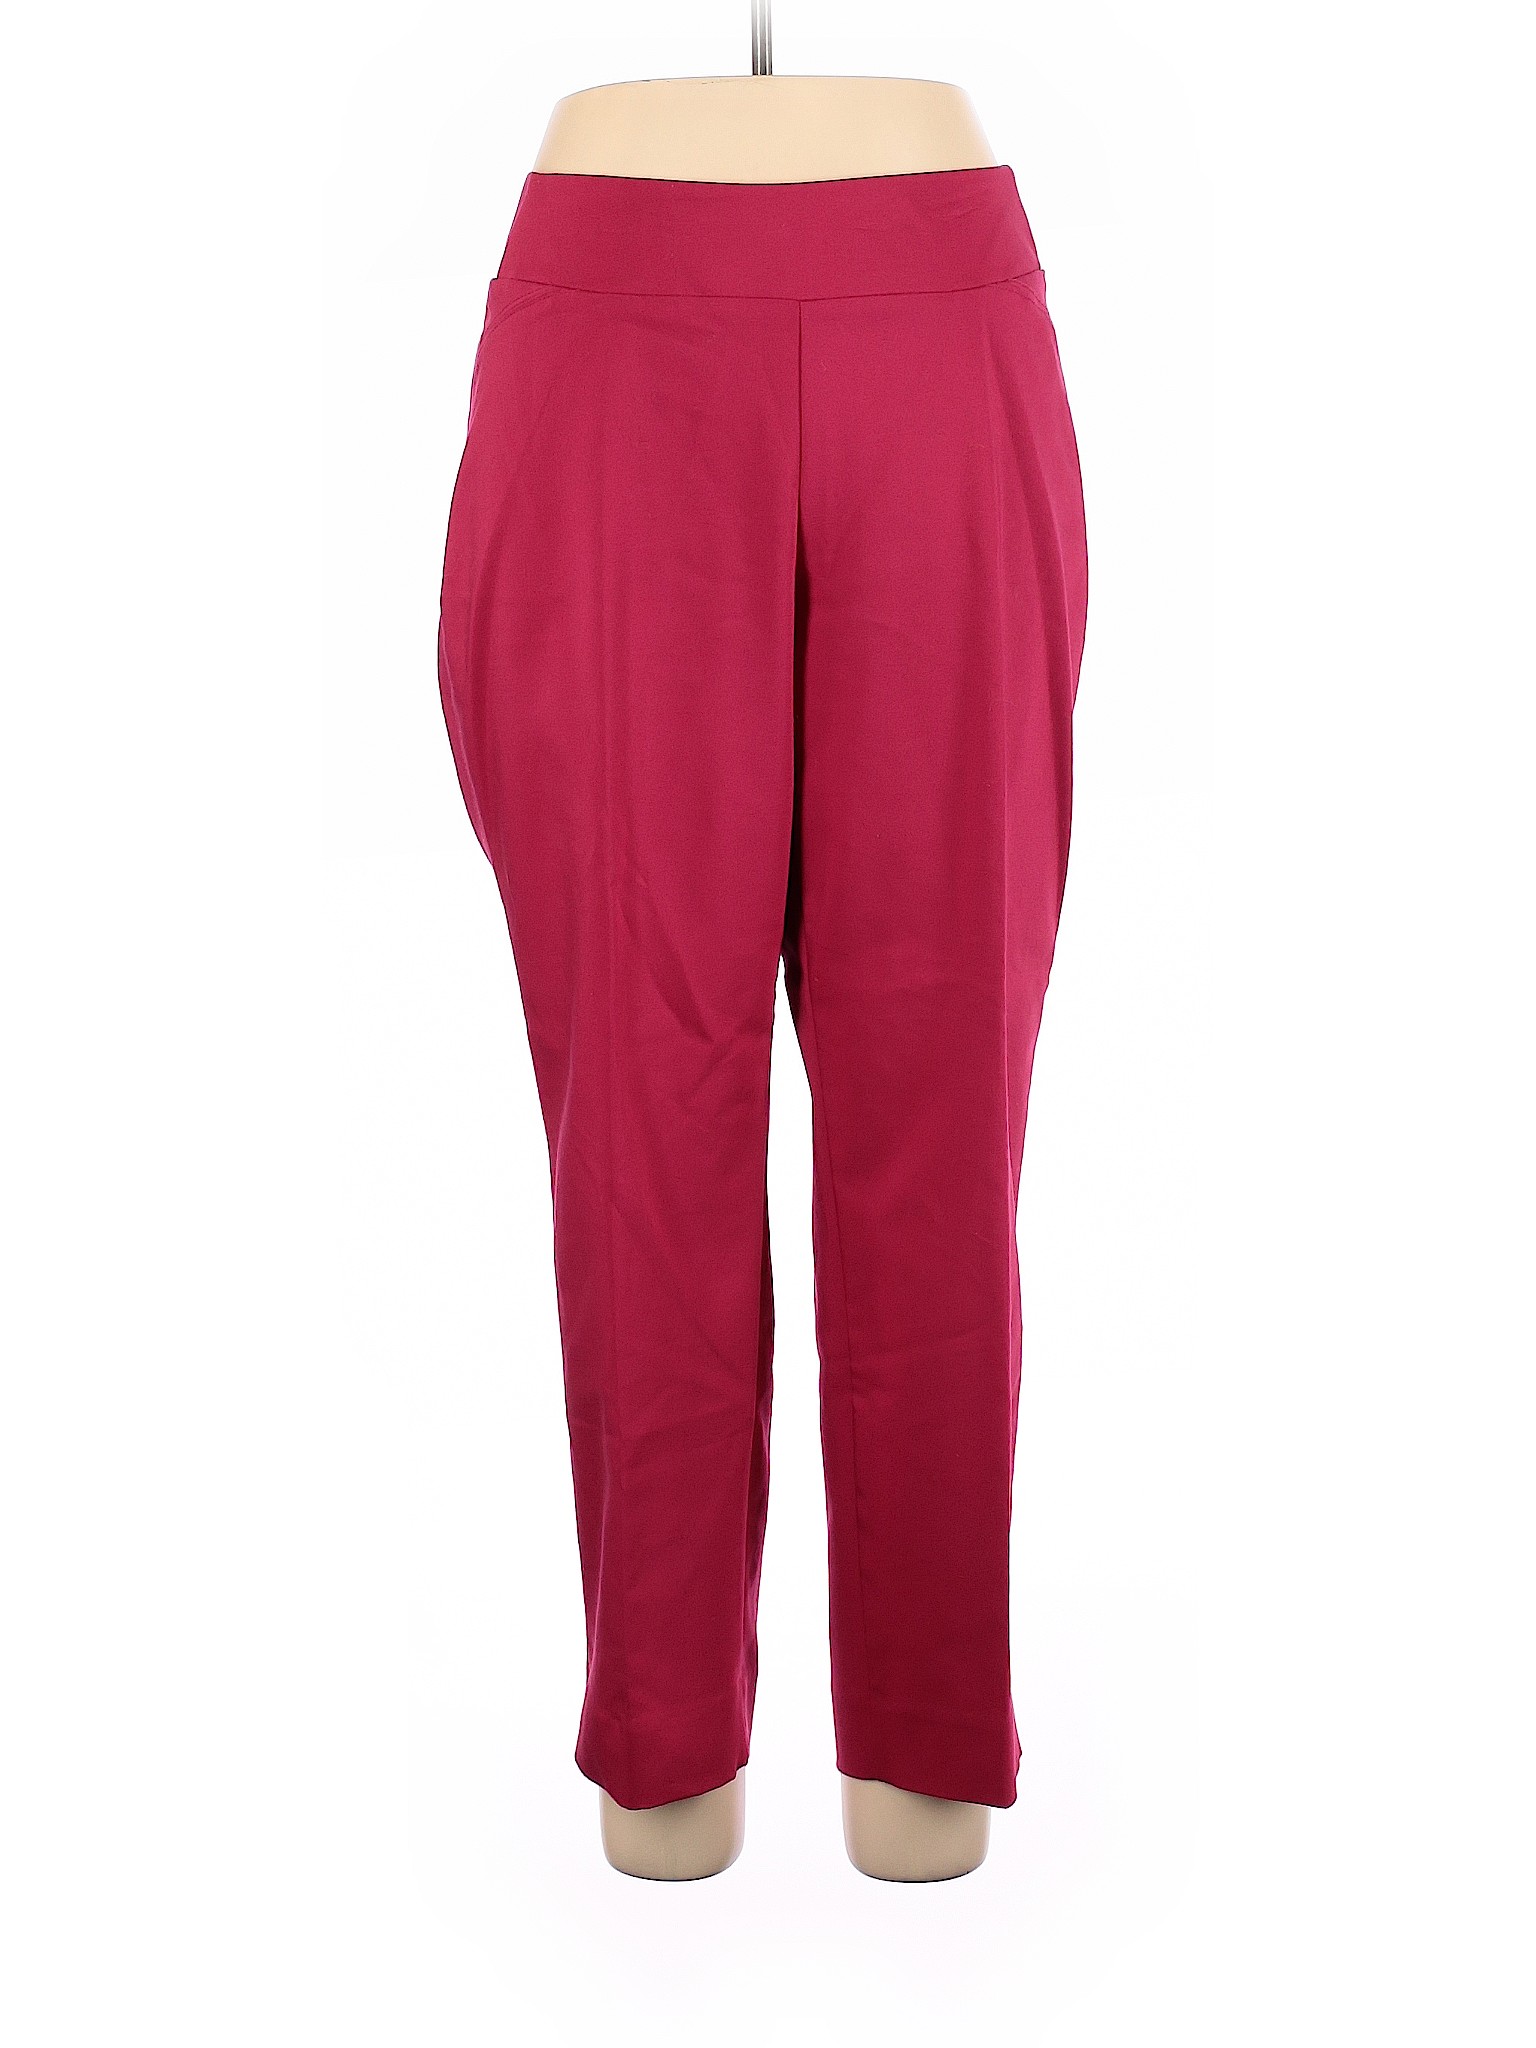 Investments Women Red Casual Pants 16 | eBay